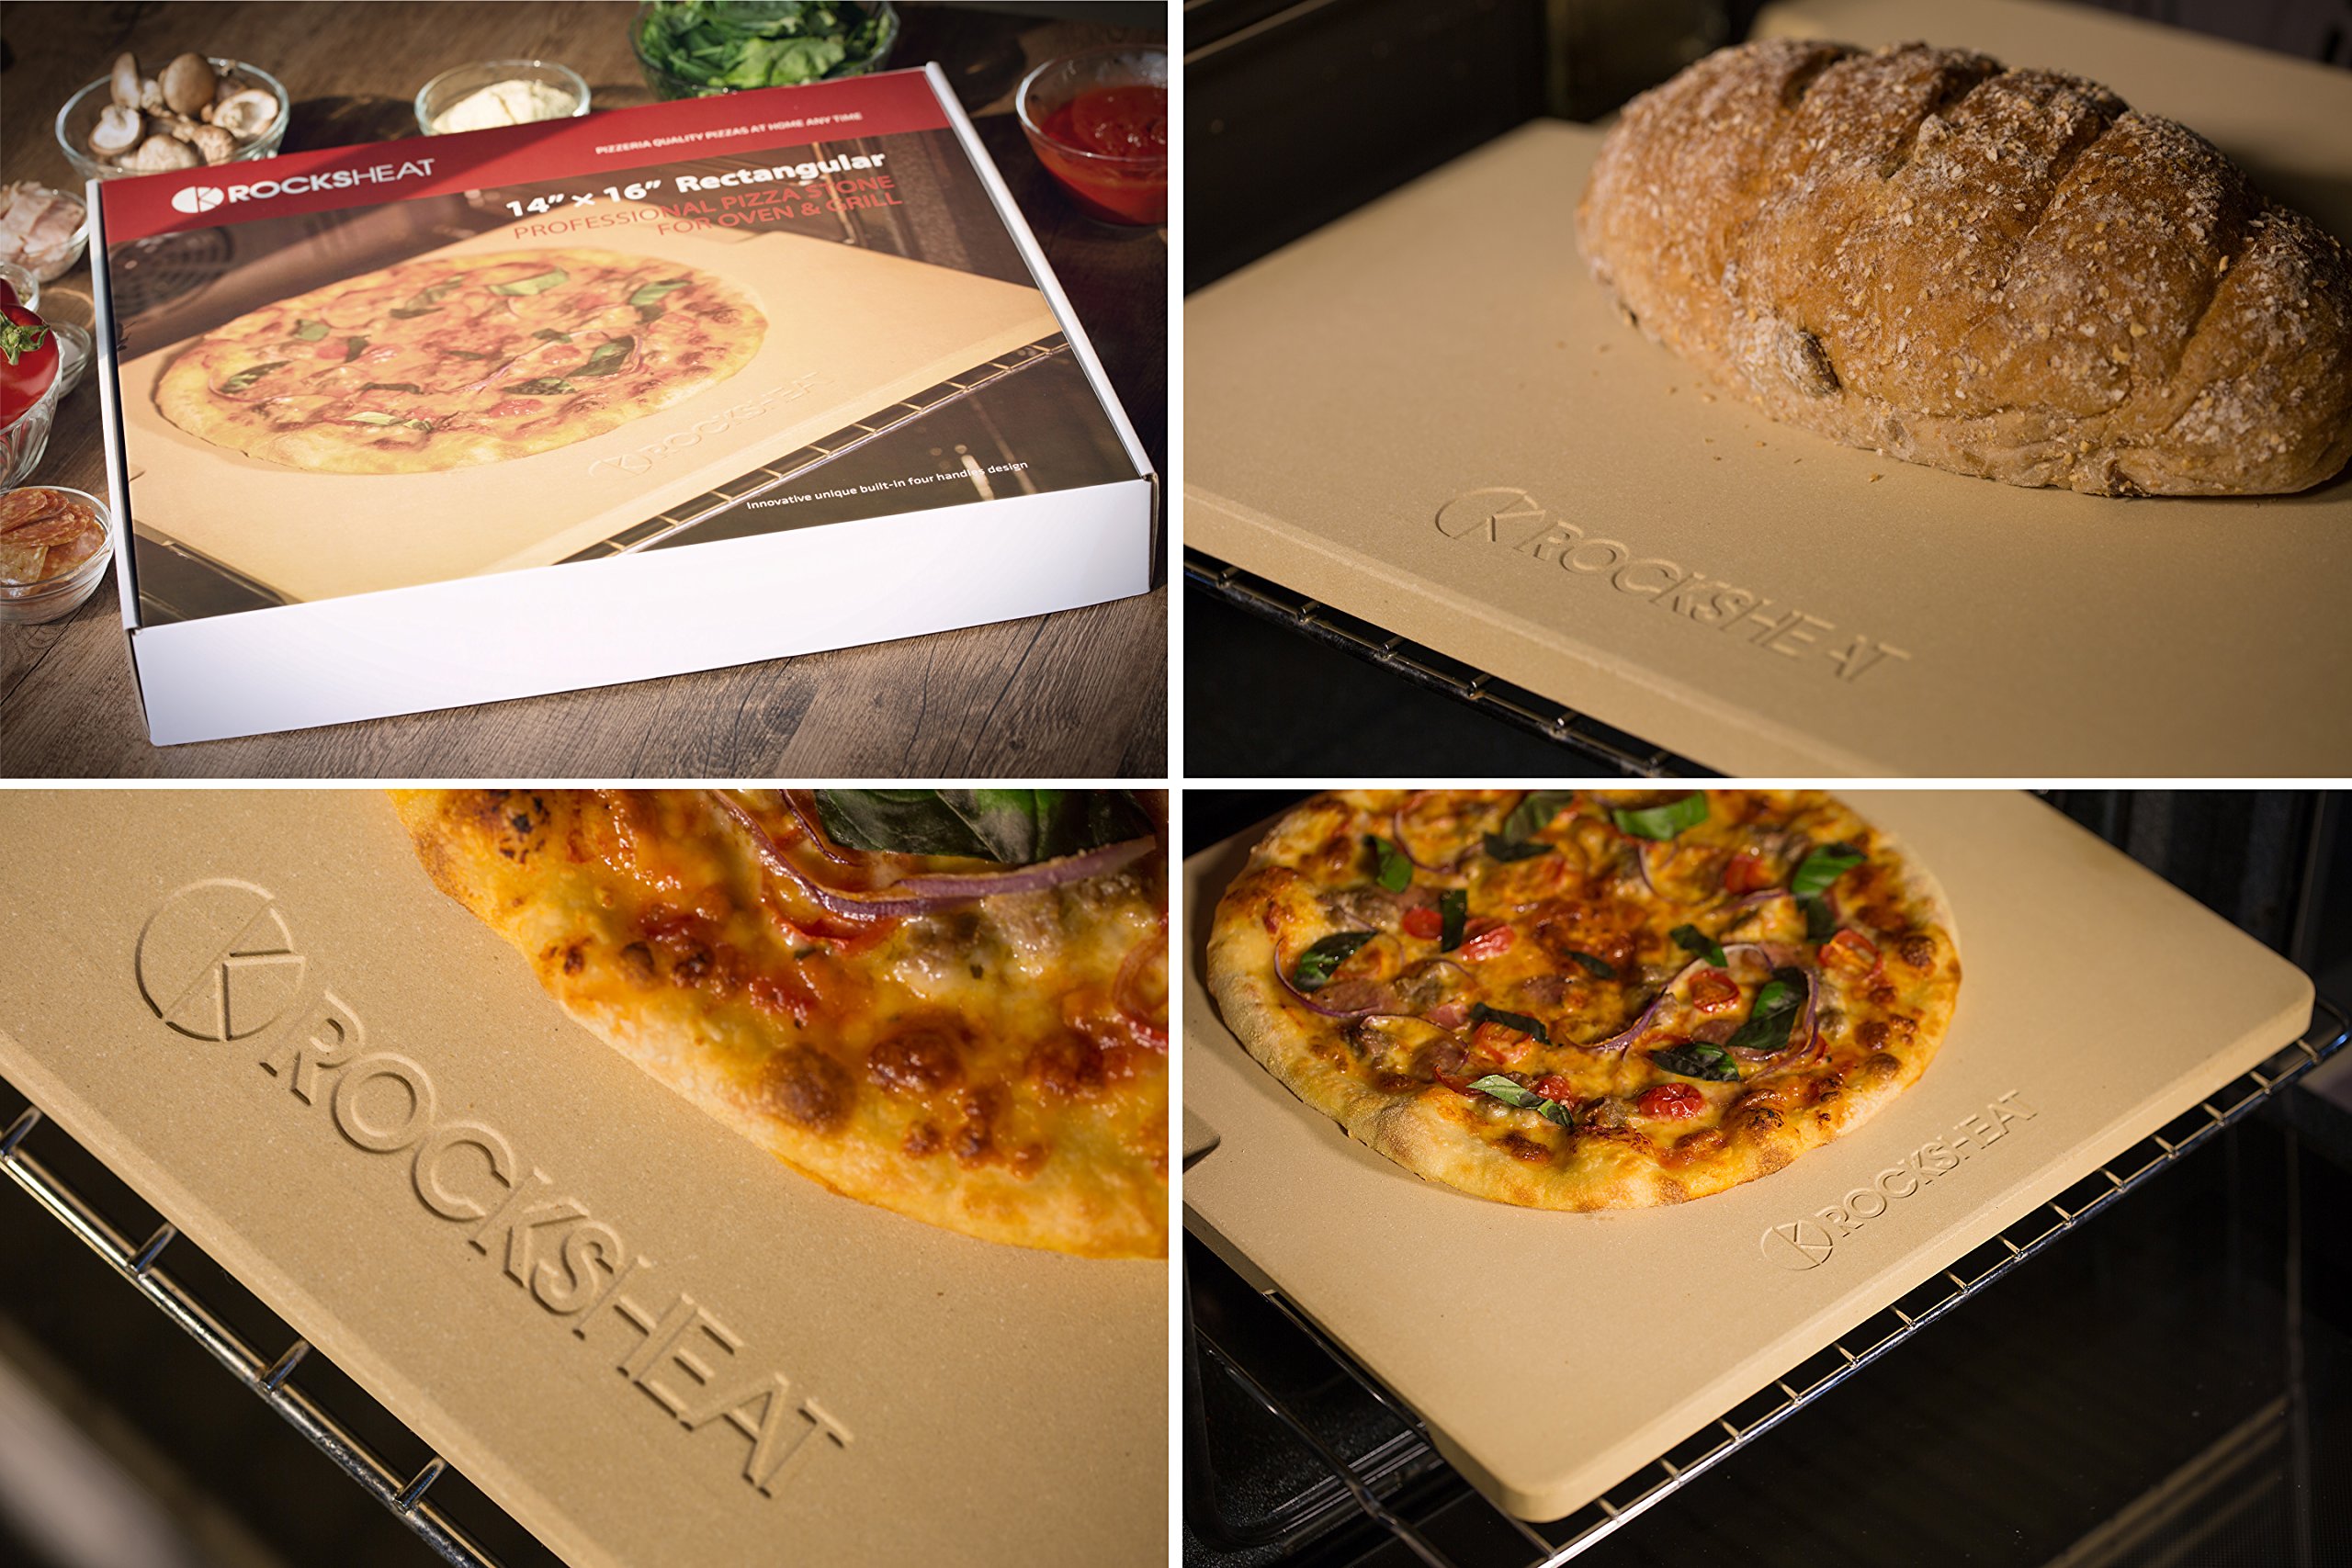 Pizza Stone Baking & Grilling Stone, Perfect for Oven, BBQ and Grill. Innovative Double - faced Built - in 4 Handles Design (14